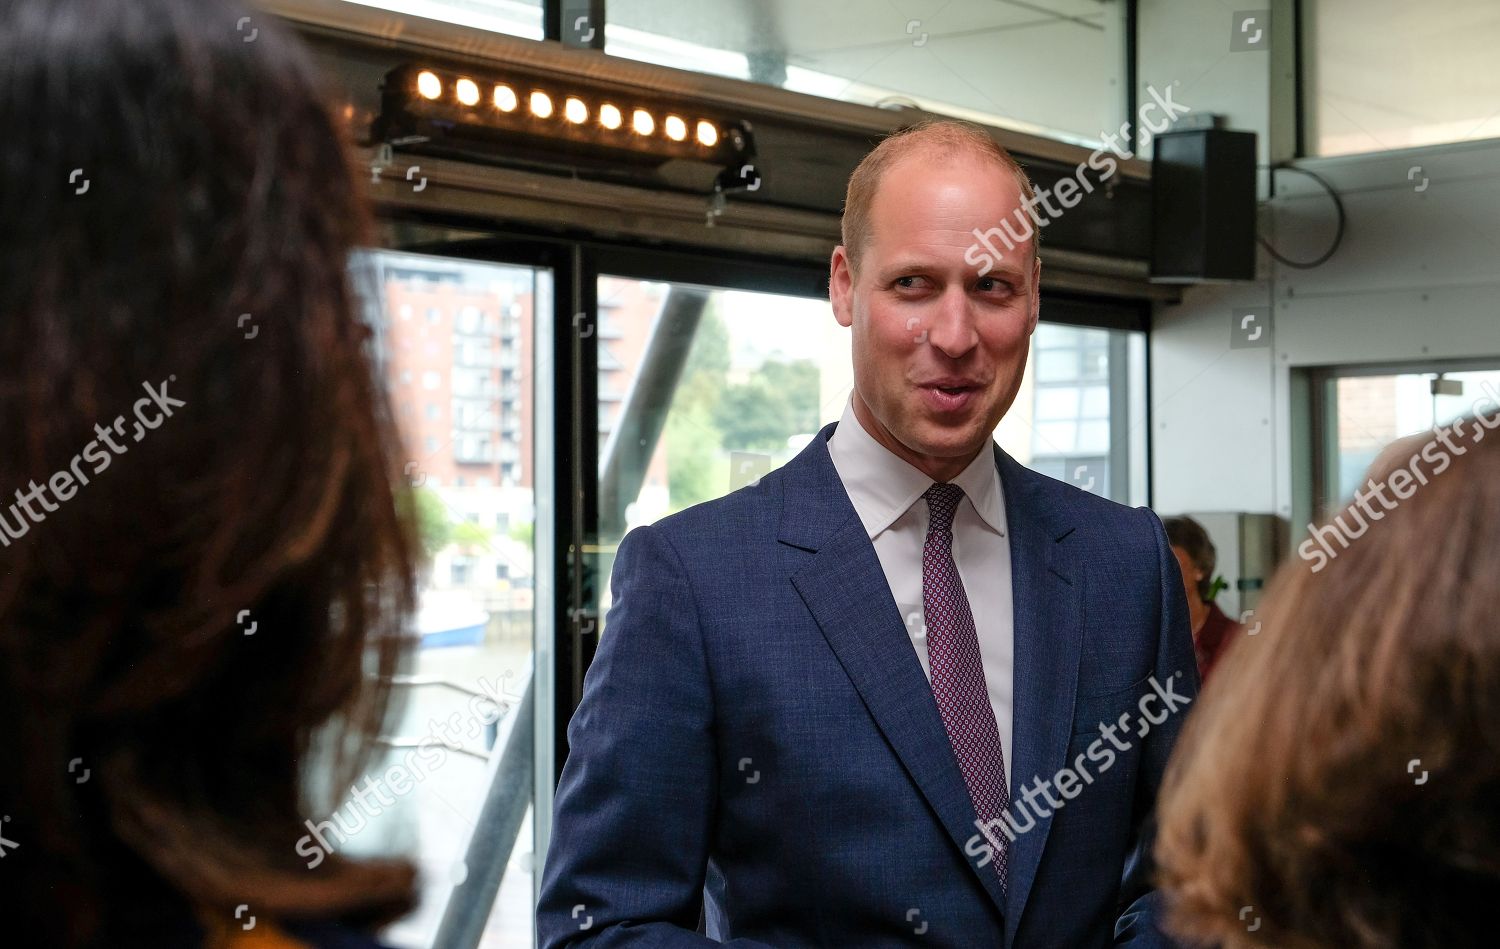 prince-william-visit-to-the-great-exhibition-of-the-north-newcastle-uk-shutterstock-editorial-9876204b.jpg